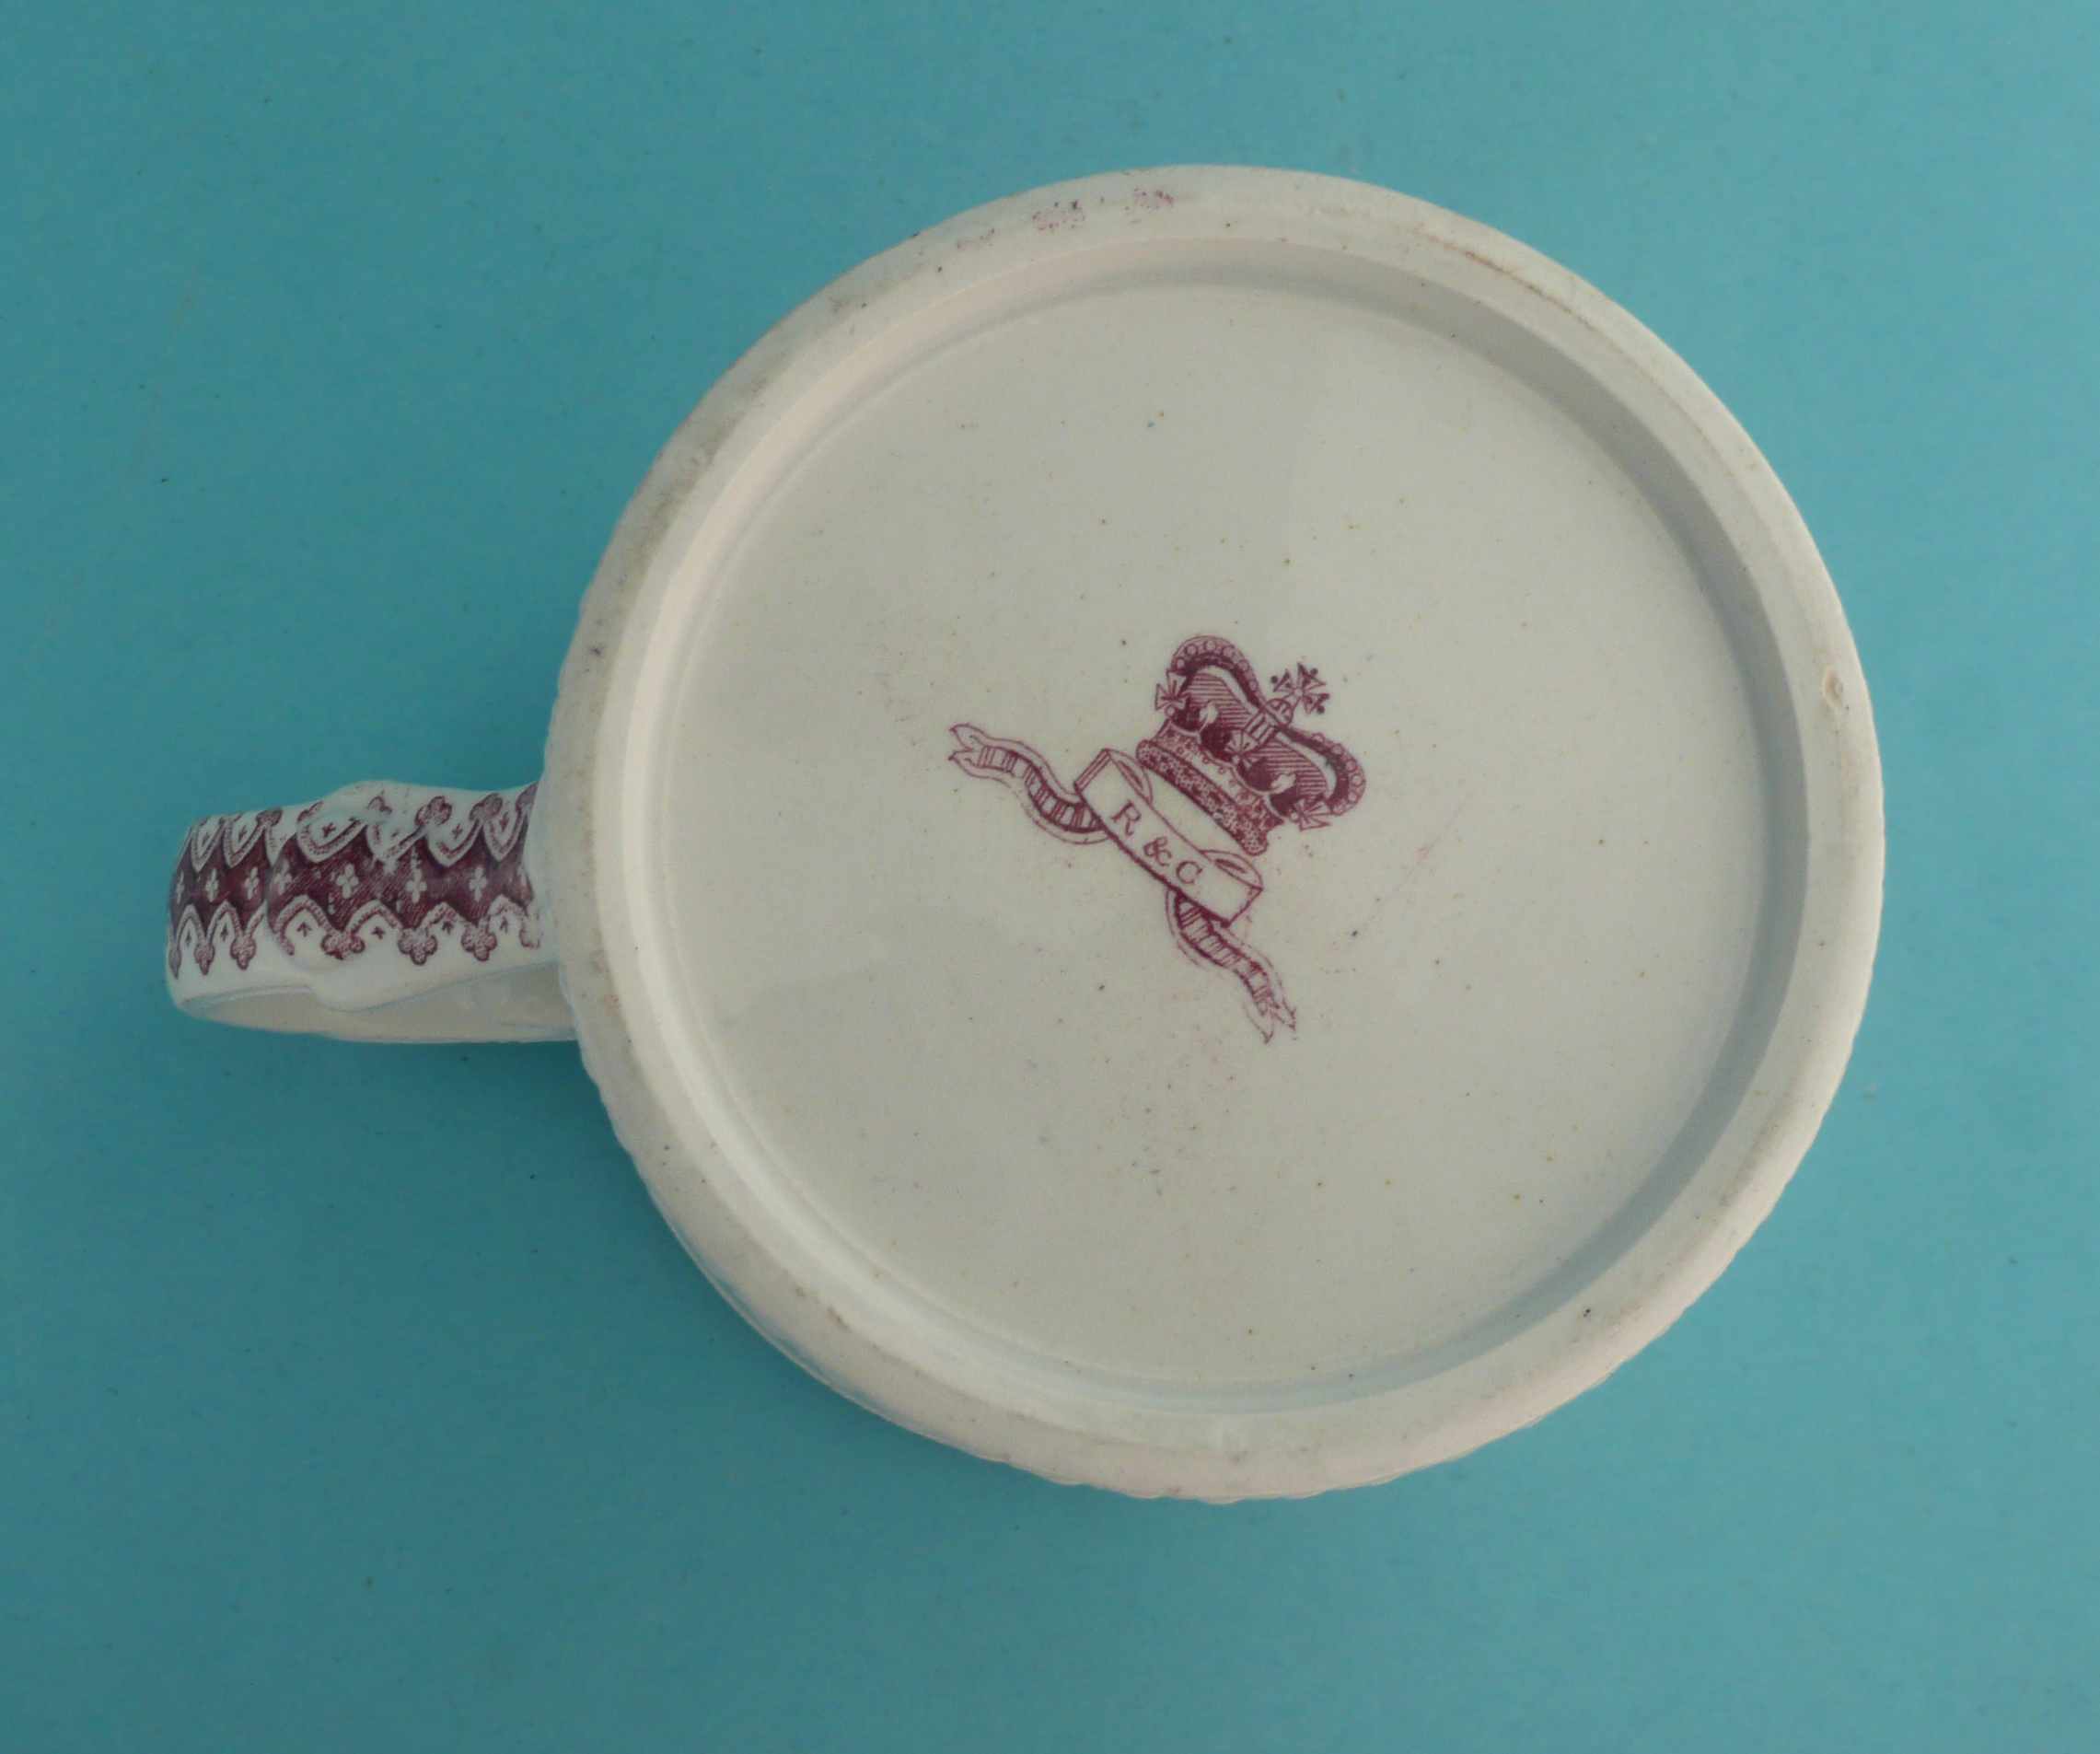 1838 Coronation: a cylindrical pearlware mug by Read & Clementson printed in pink with portraits - Image 4 of 5